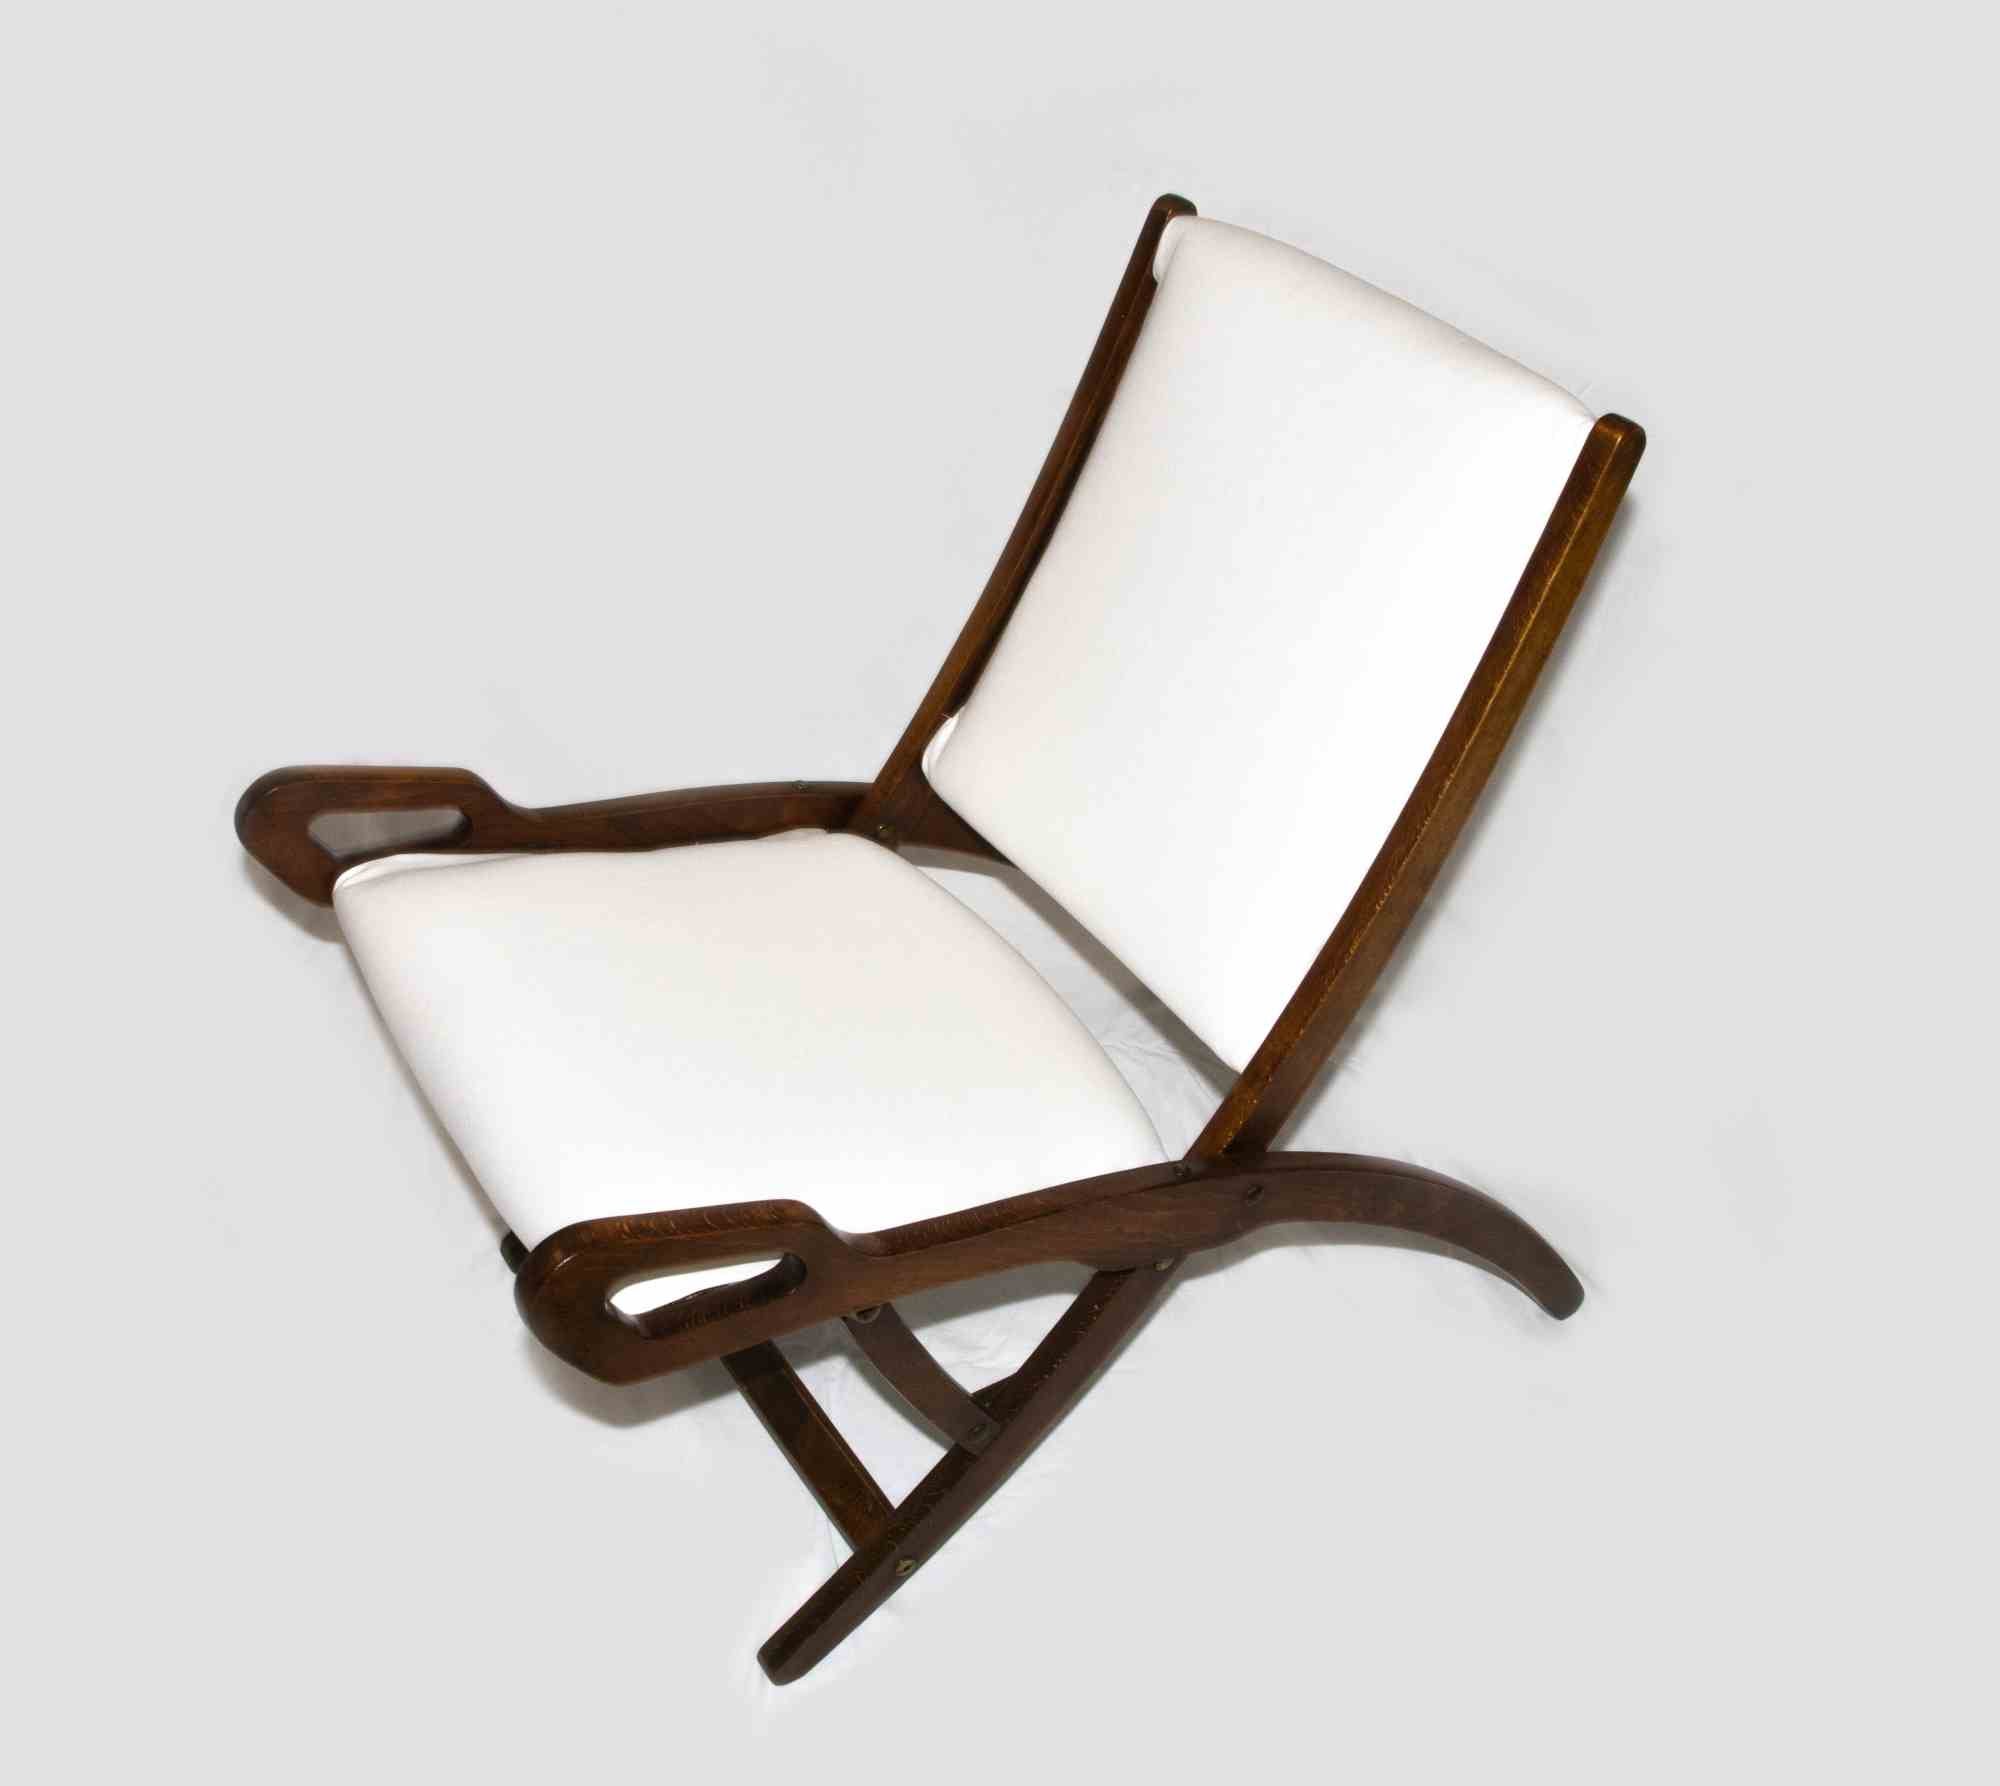 Vintage folding chair Ninfea by Gio Ponti for Reguitti, Italy 1958.

Dimensions: Width 48 cm - Depth 66 cm - Height 71 cm - Seat height 33 cm.

Wood, Brass and Fabric.

Good conditions.

Born in Milan in 1891, Giovanni (Gio) Ponti studied